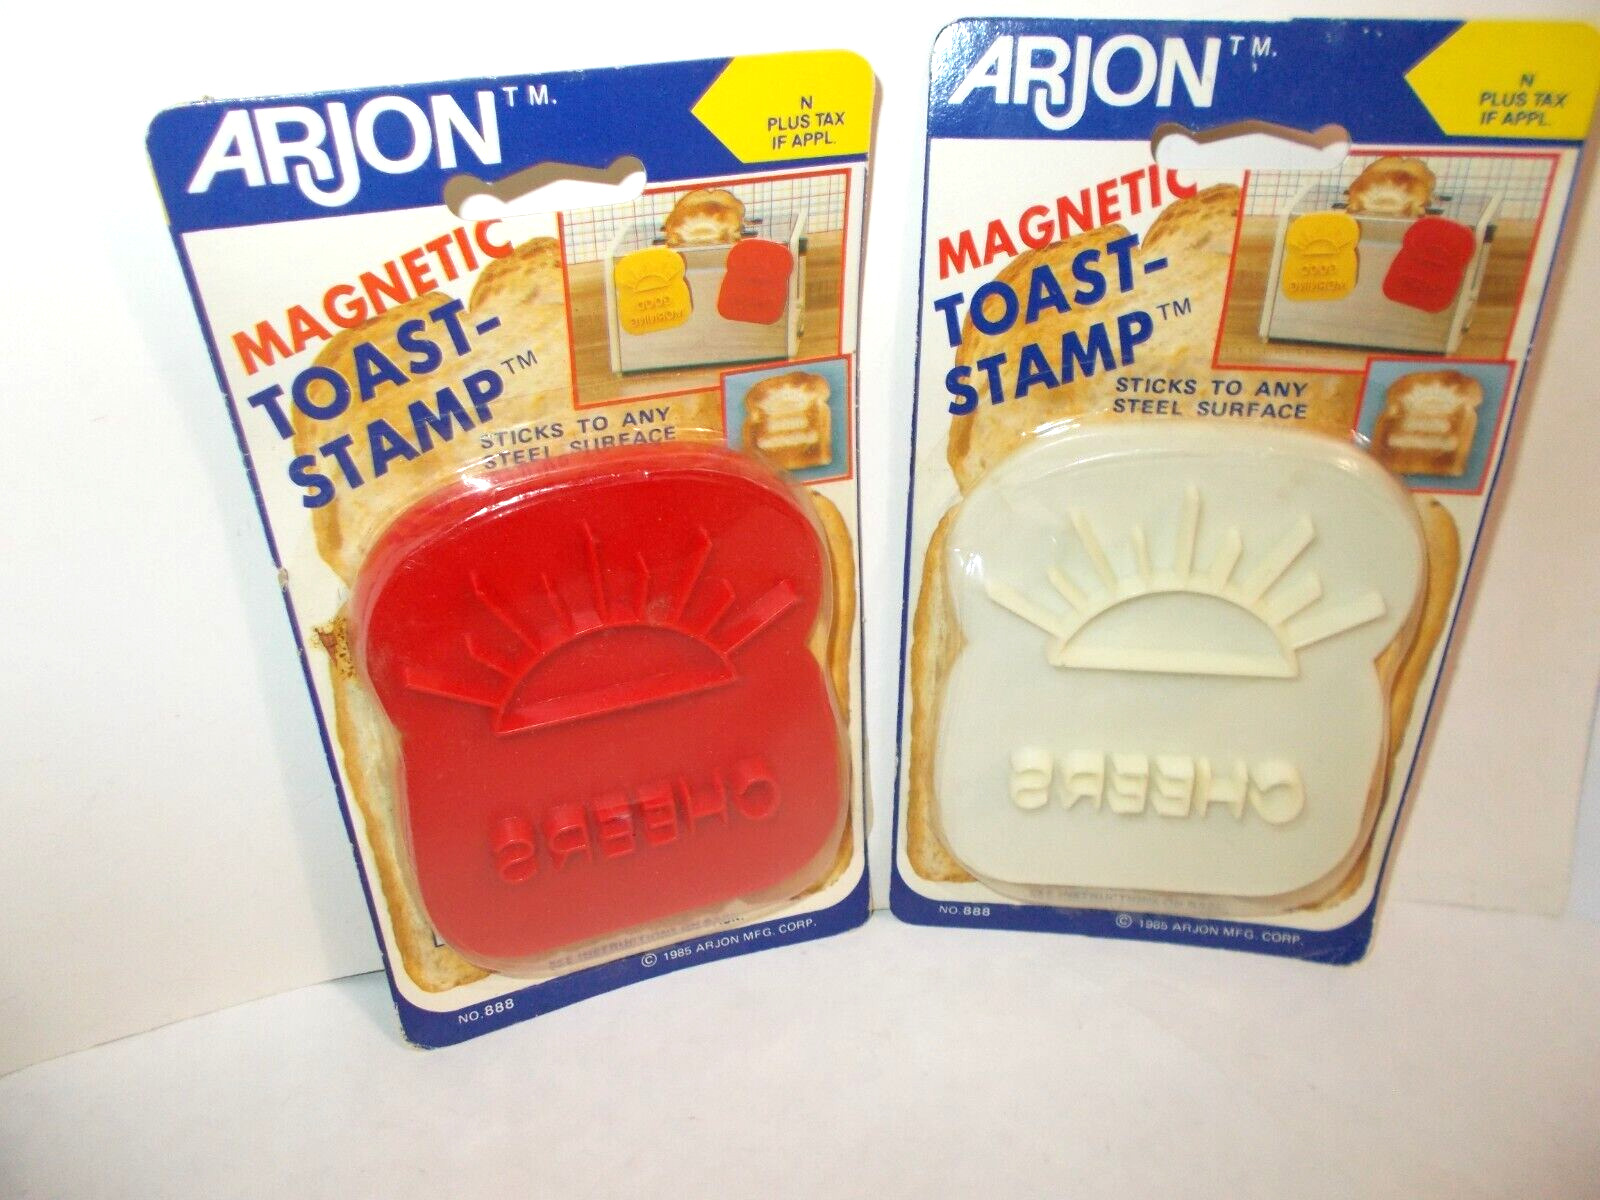 2 VINTAGE *ARJON* MAGNETIC TOAST-STAMP ~CHEERS~  STICKS TO ANY STEEL SURFACE NOS